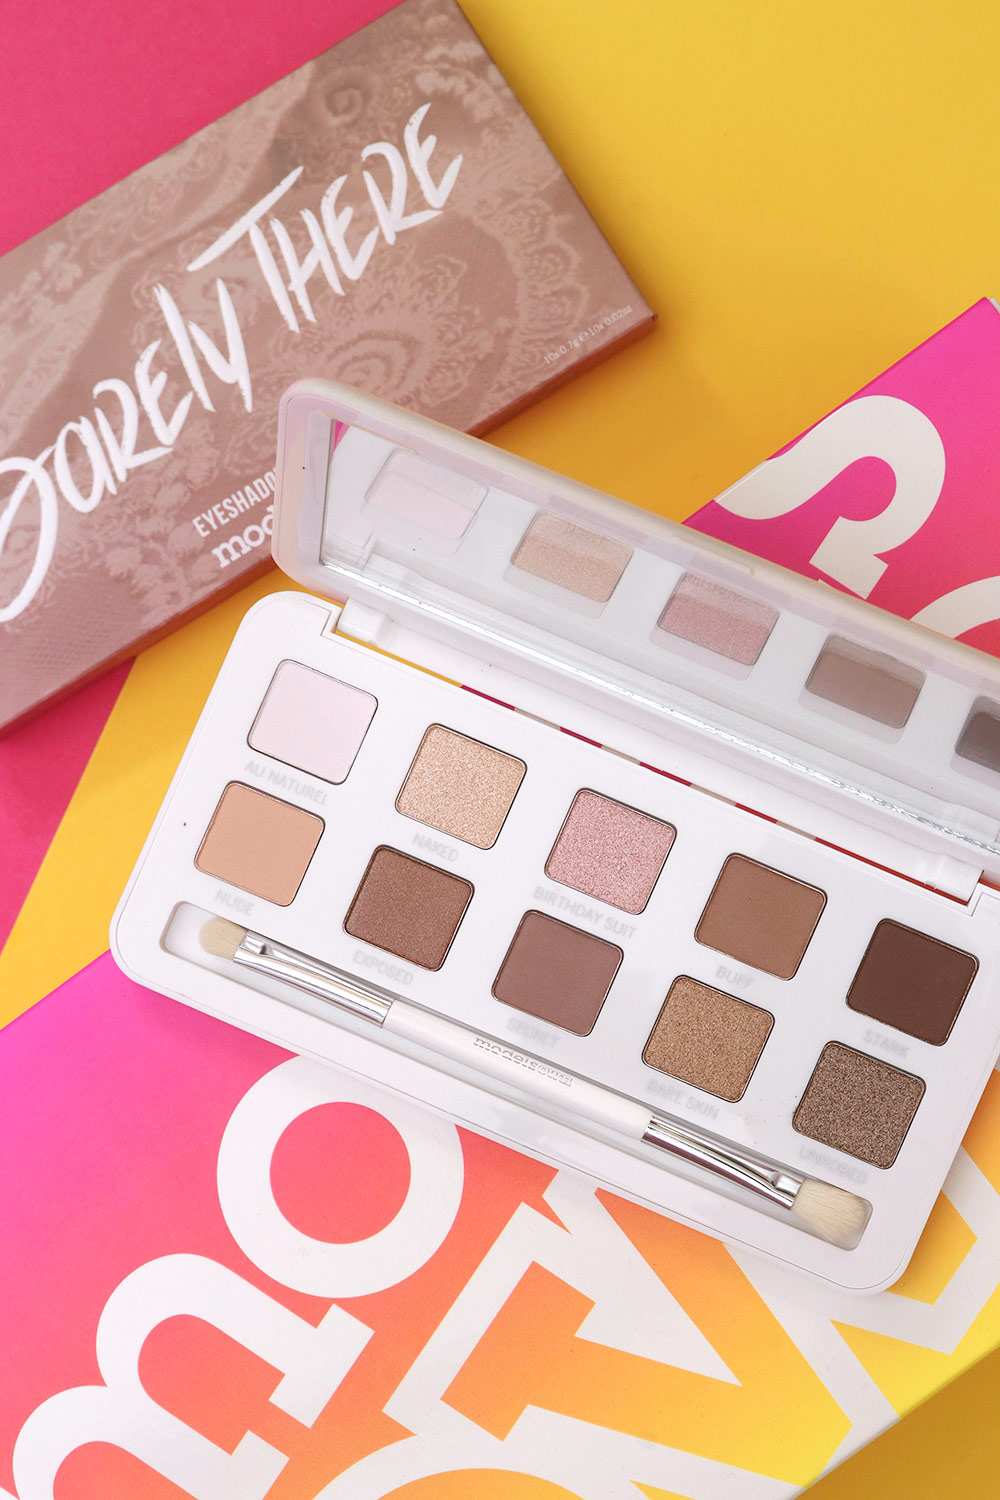 models own barely there eyeshadow palette